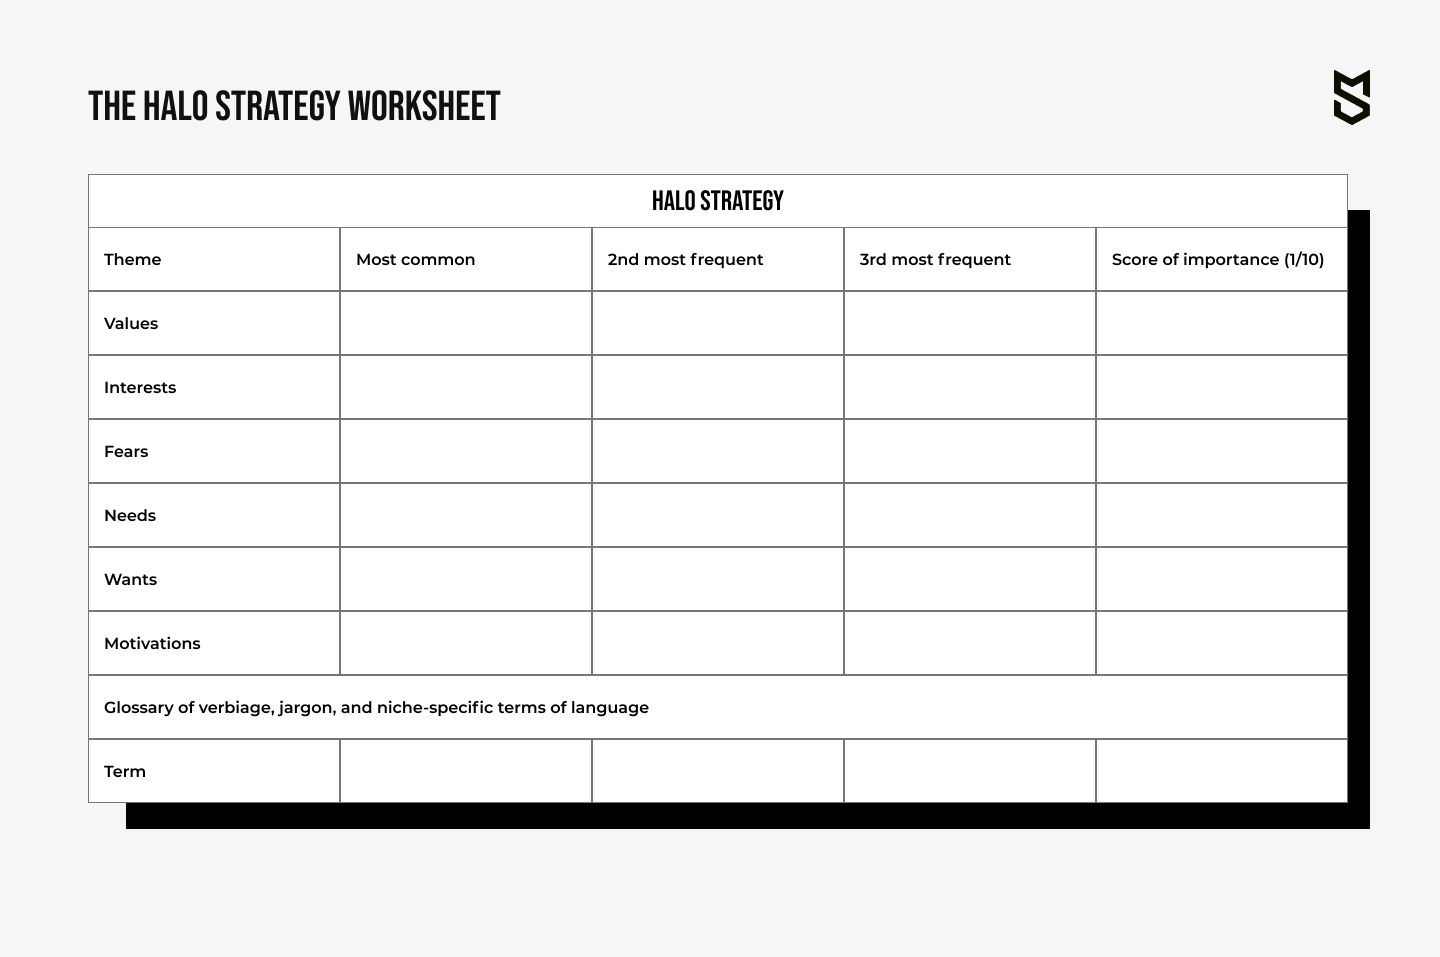 The HALO strategy worksheet